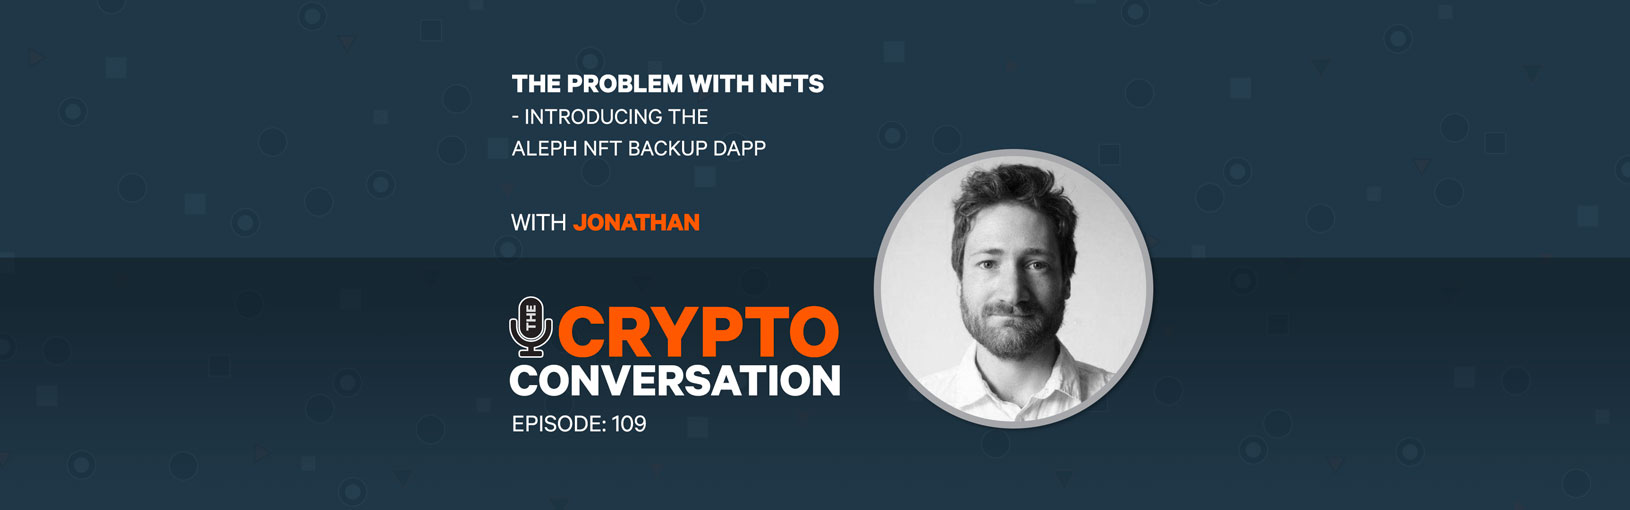 The problem with NFTs and the Aleph NFT backup dApp